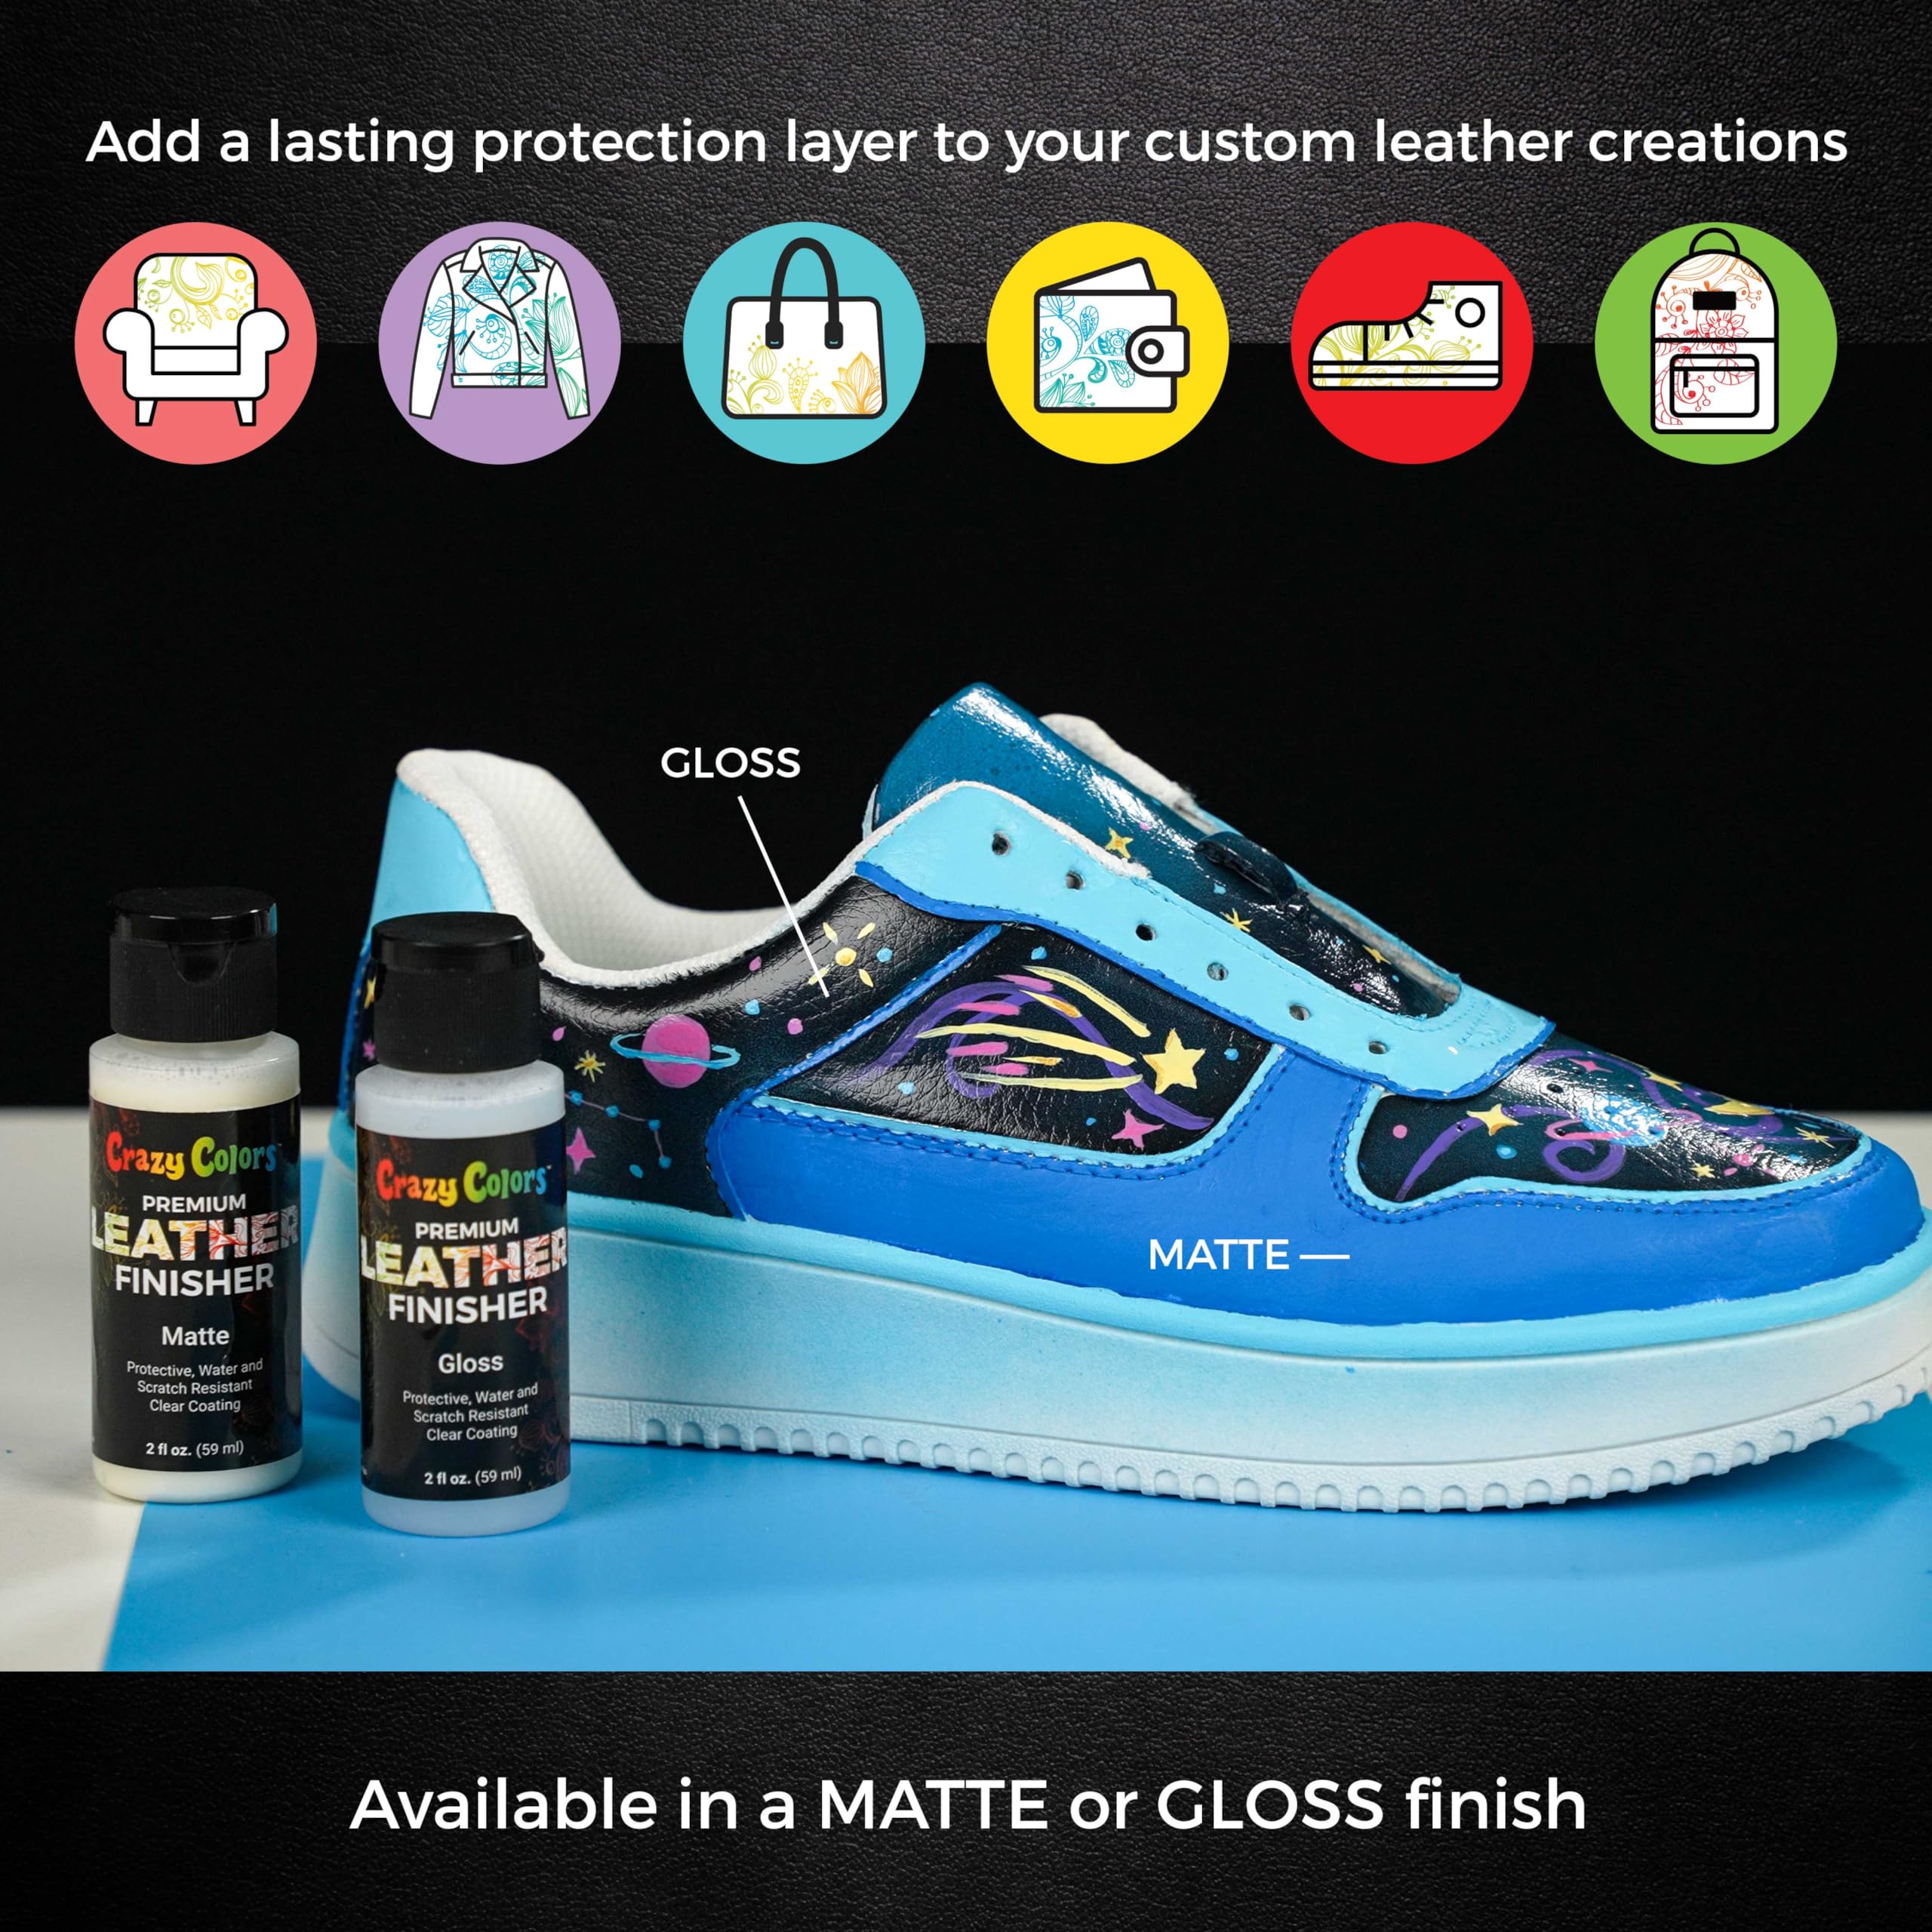 Crazy Colors Premium Dull Matte Acrylic Leather and Shoe Paint Finisher, 2 oz Bottle - Clearcoat Sealant Protection - Durable Scratch, Crack, Peel, Fade Resistant Finish - Artwork Jackets, Bags Purses